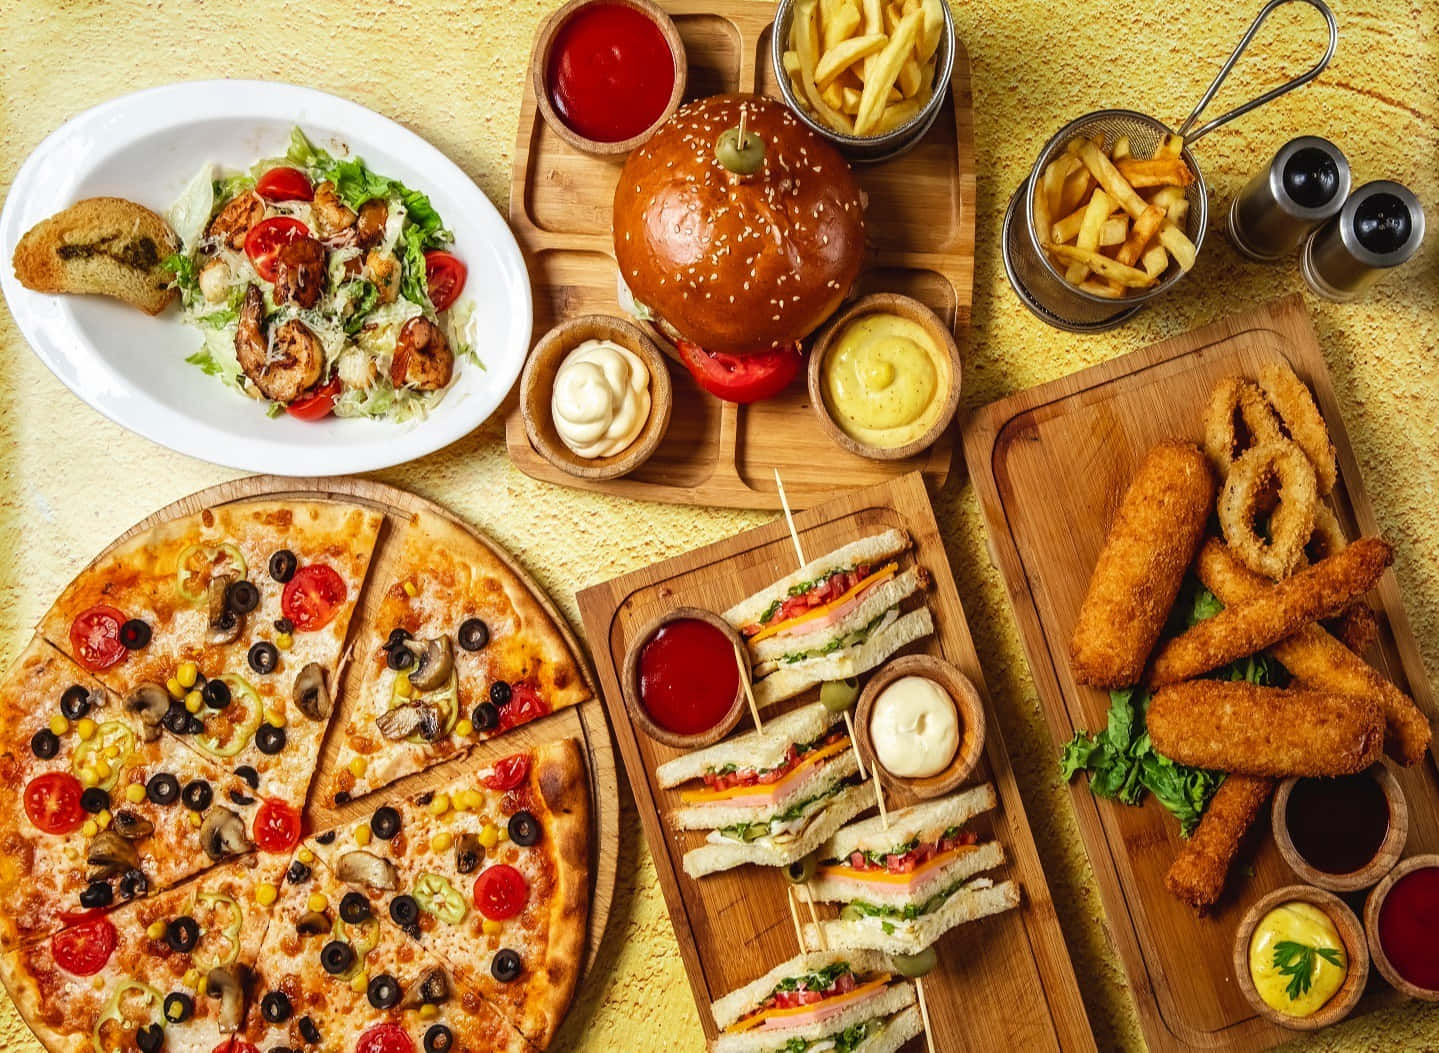 A Pizza, Fries, And Other Food On A Wooden Table